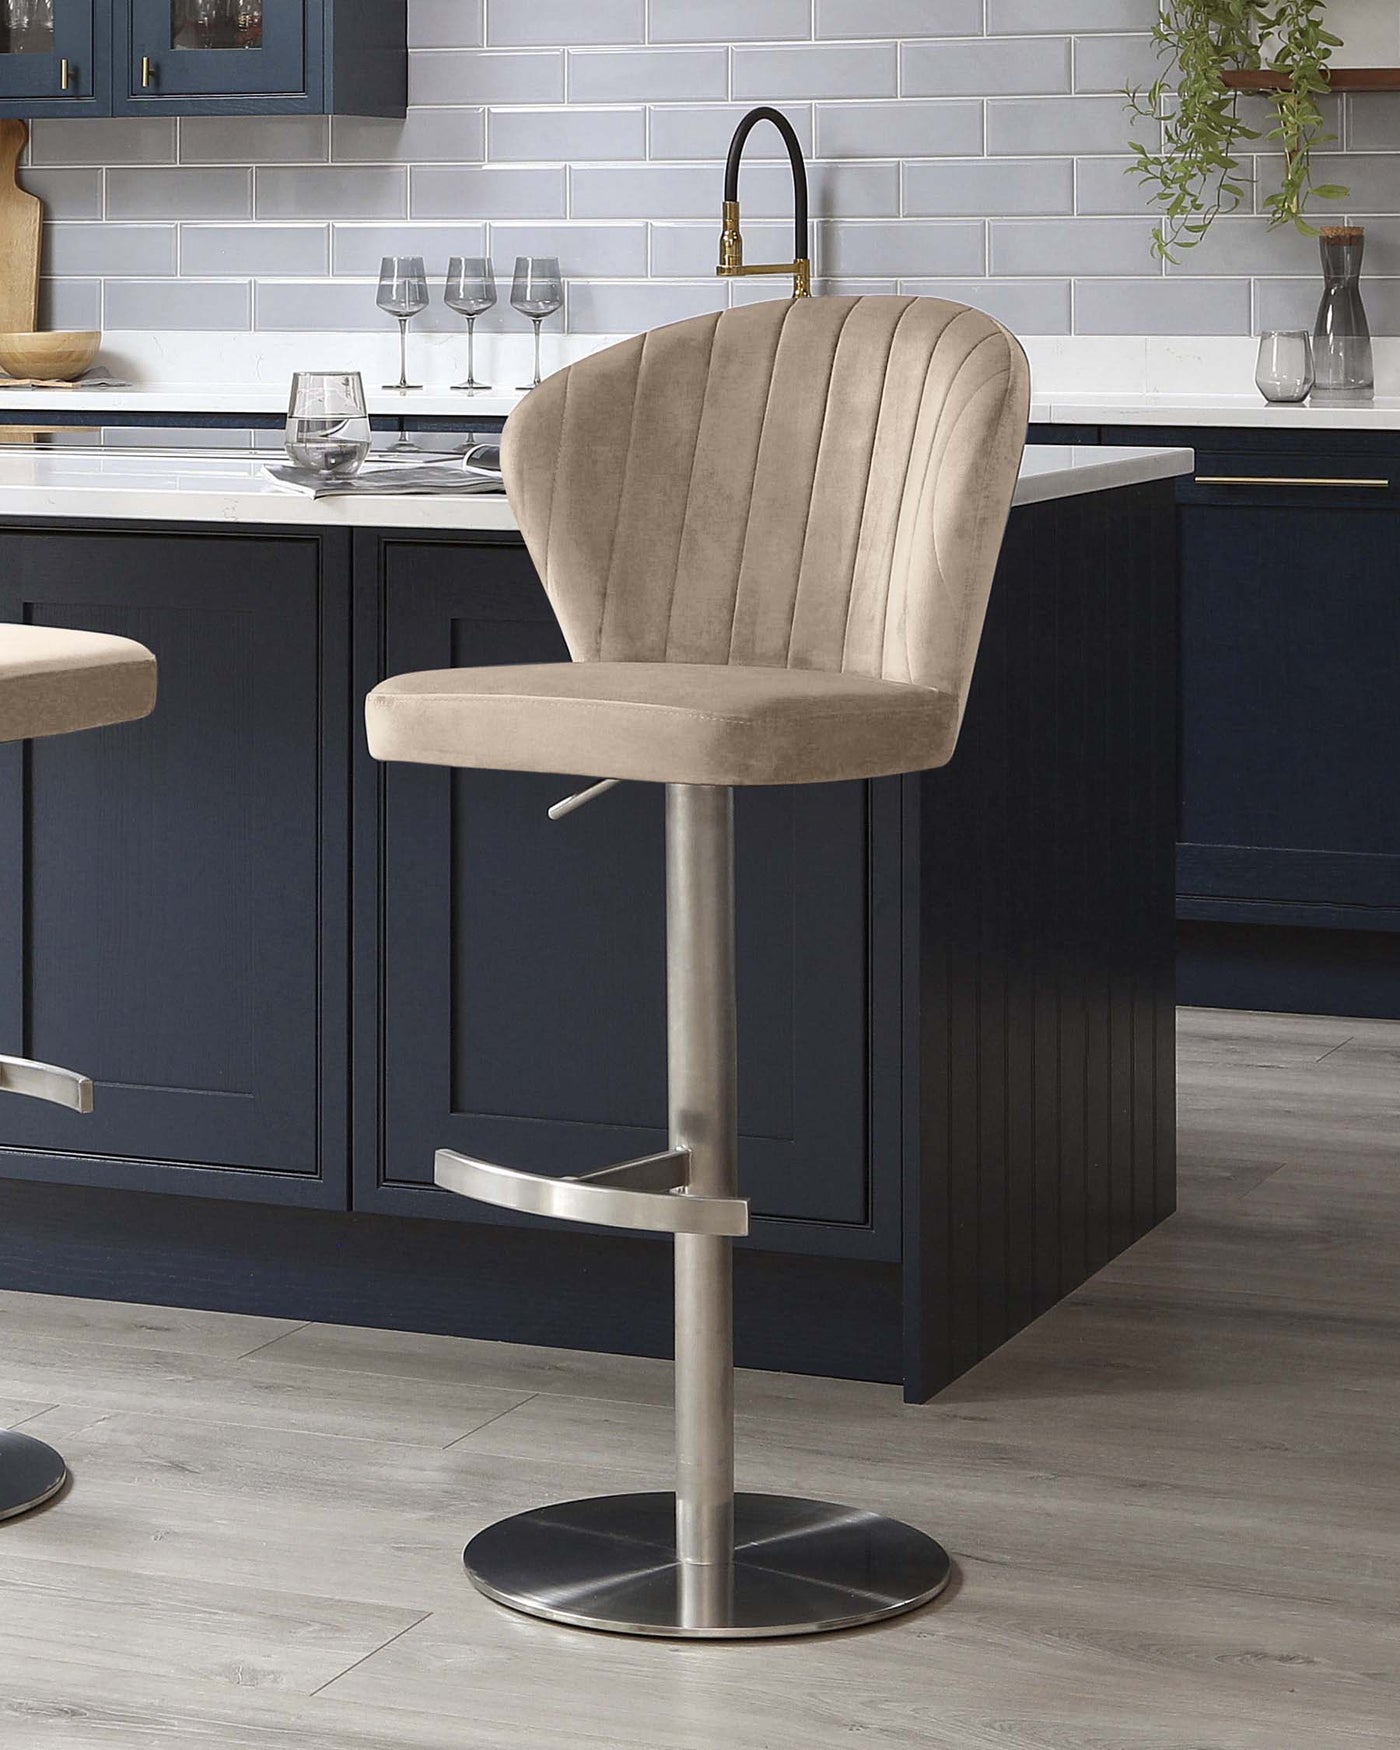 Elegant modern bar stool with velvet upholstery in a soft taupe colour, featuring vertical stitching on the curved backrest and a comfortable padded seat. The stool has a sleek metallic base with a circular footrest, adjustable height lever, and a sturdy round base, set against a kitchen island background with blue subway tile and dark cabinetry.